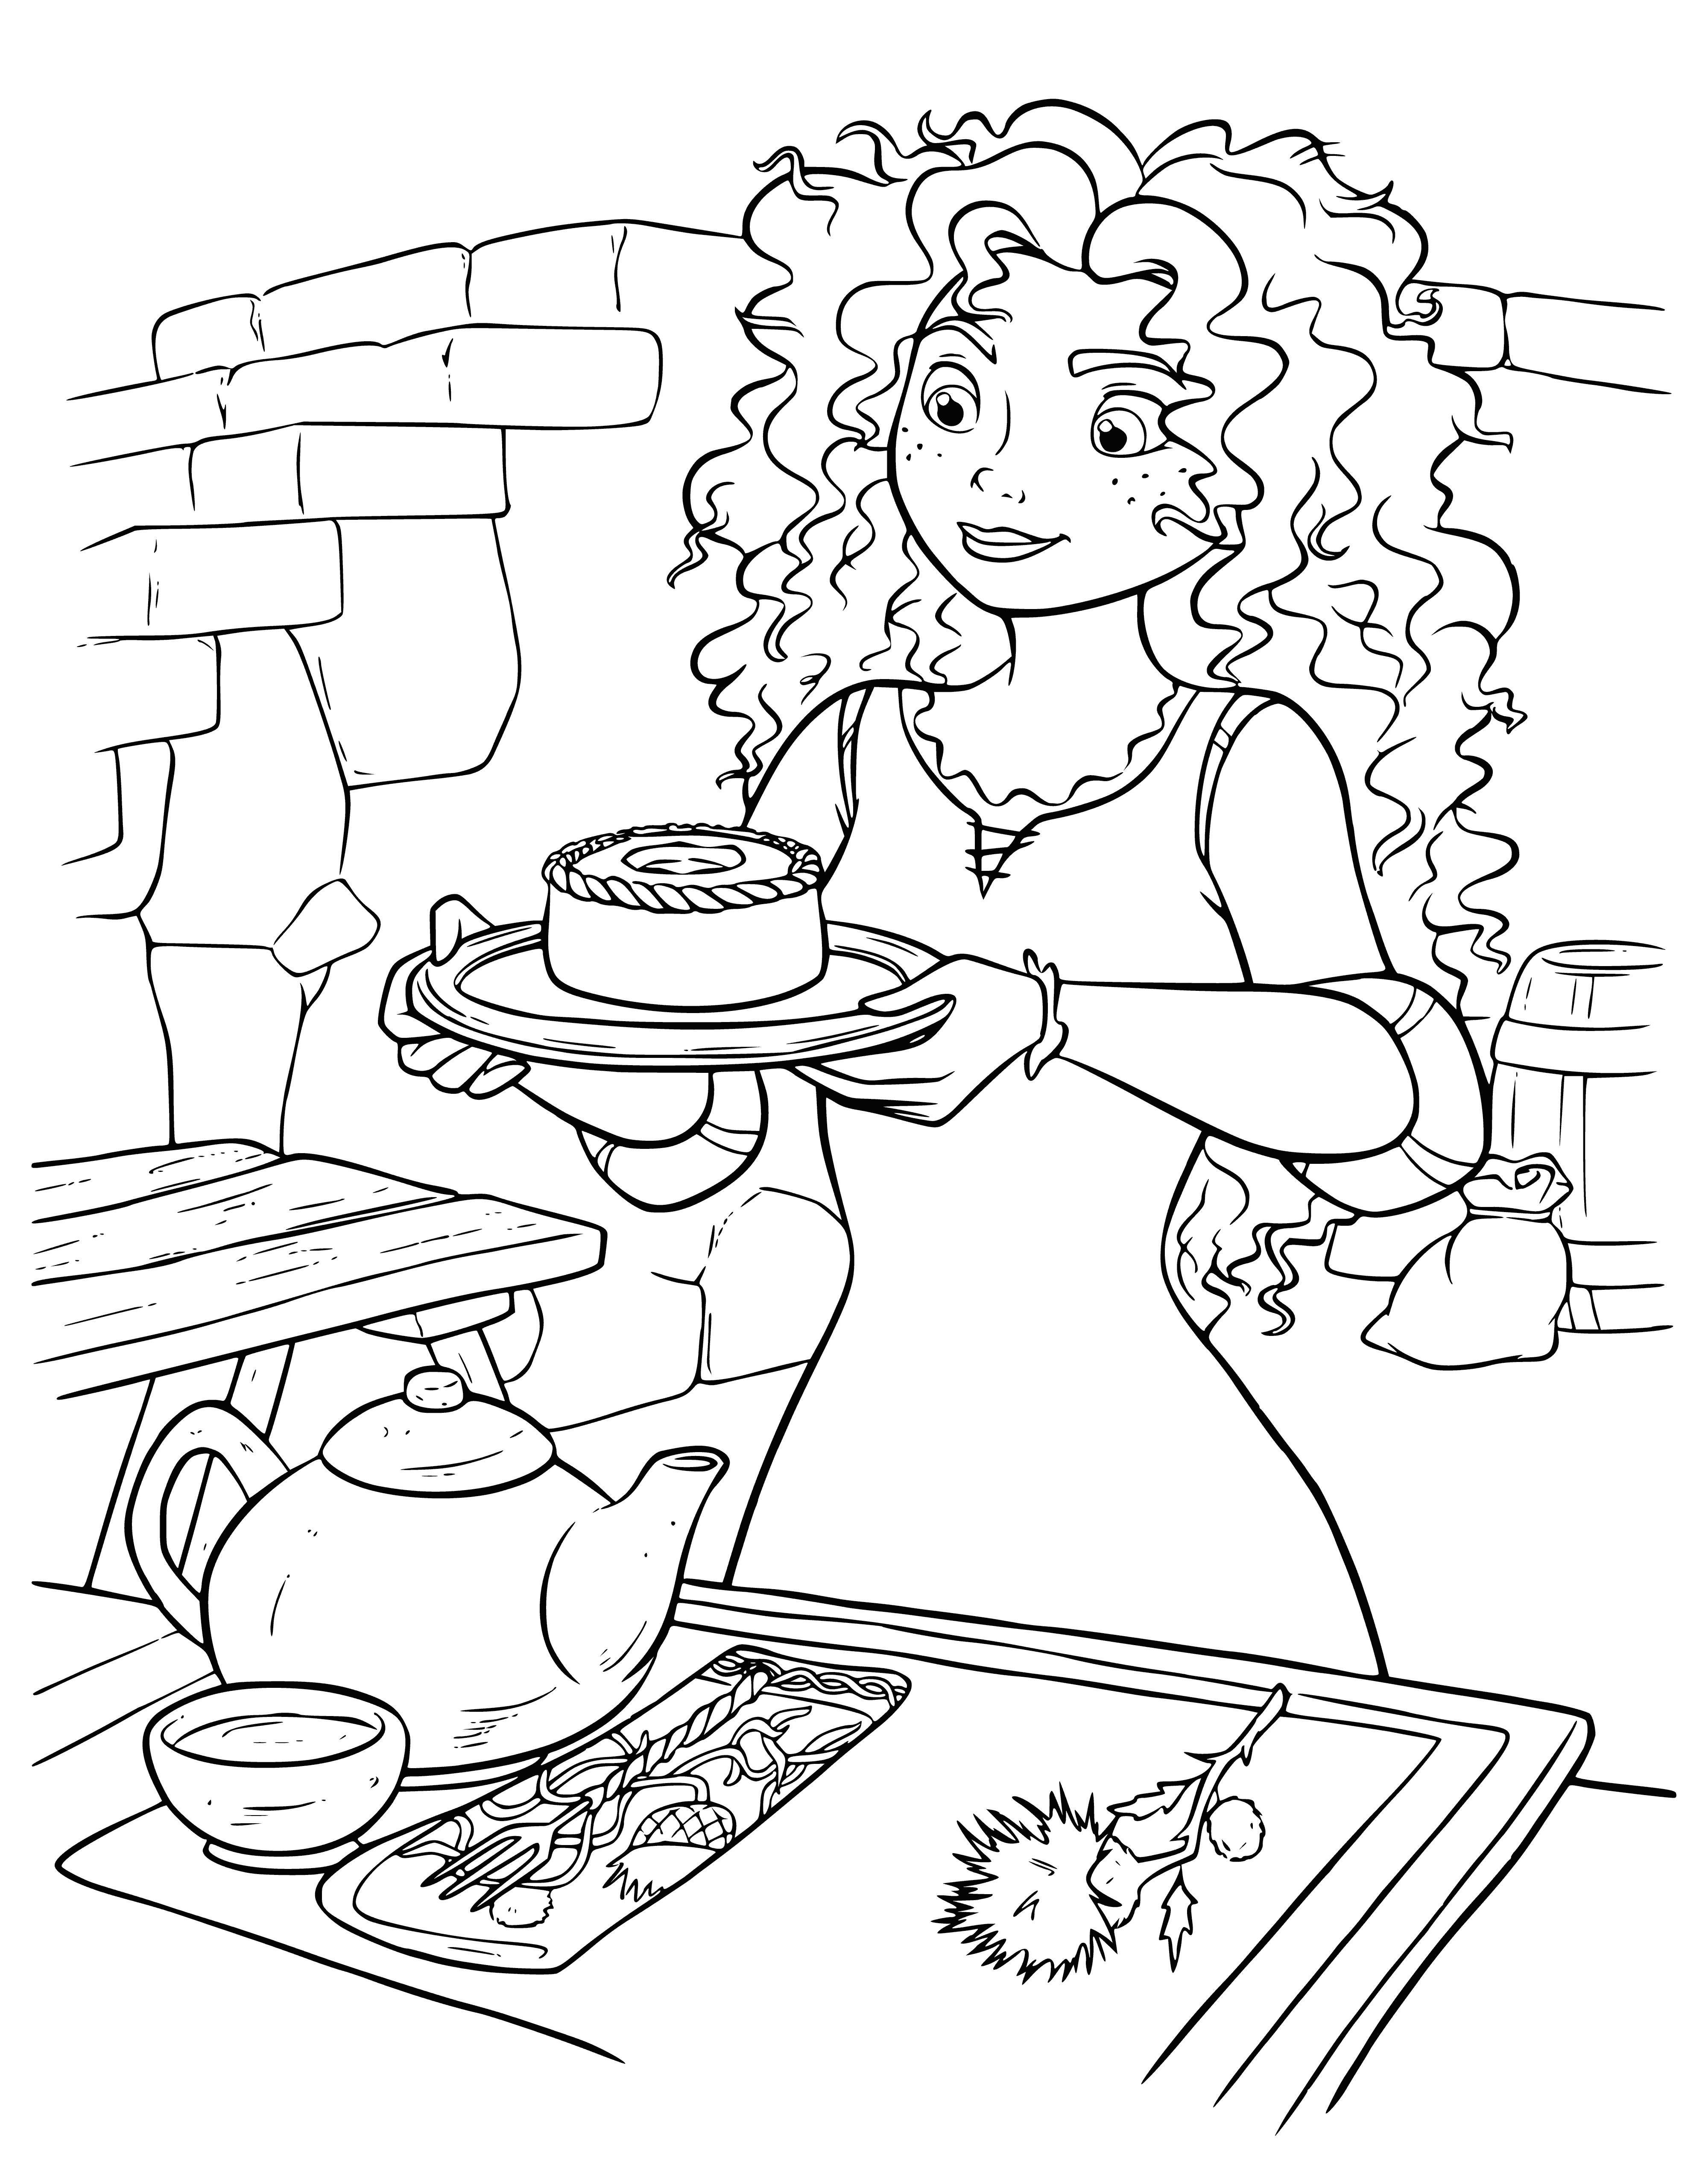 coloring page: Delicious cupcake with purple and pink frosting and a pink sugar flower on top, sitting on a white plate. #yum